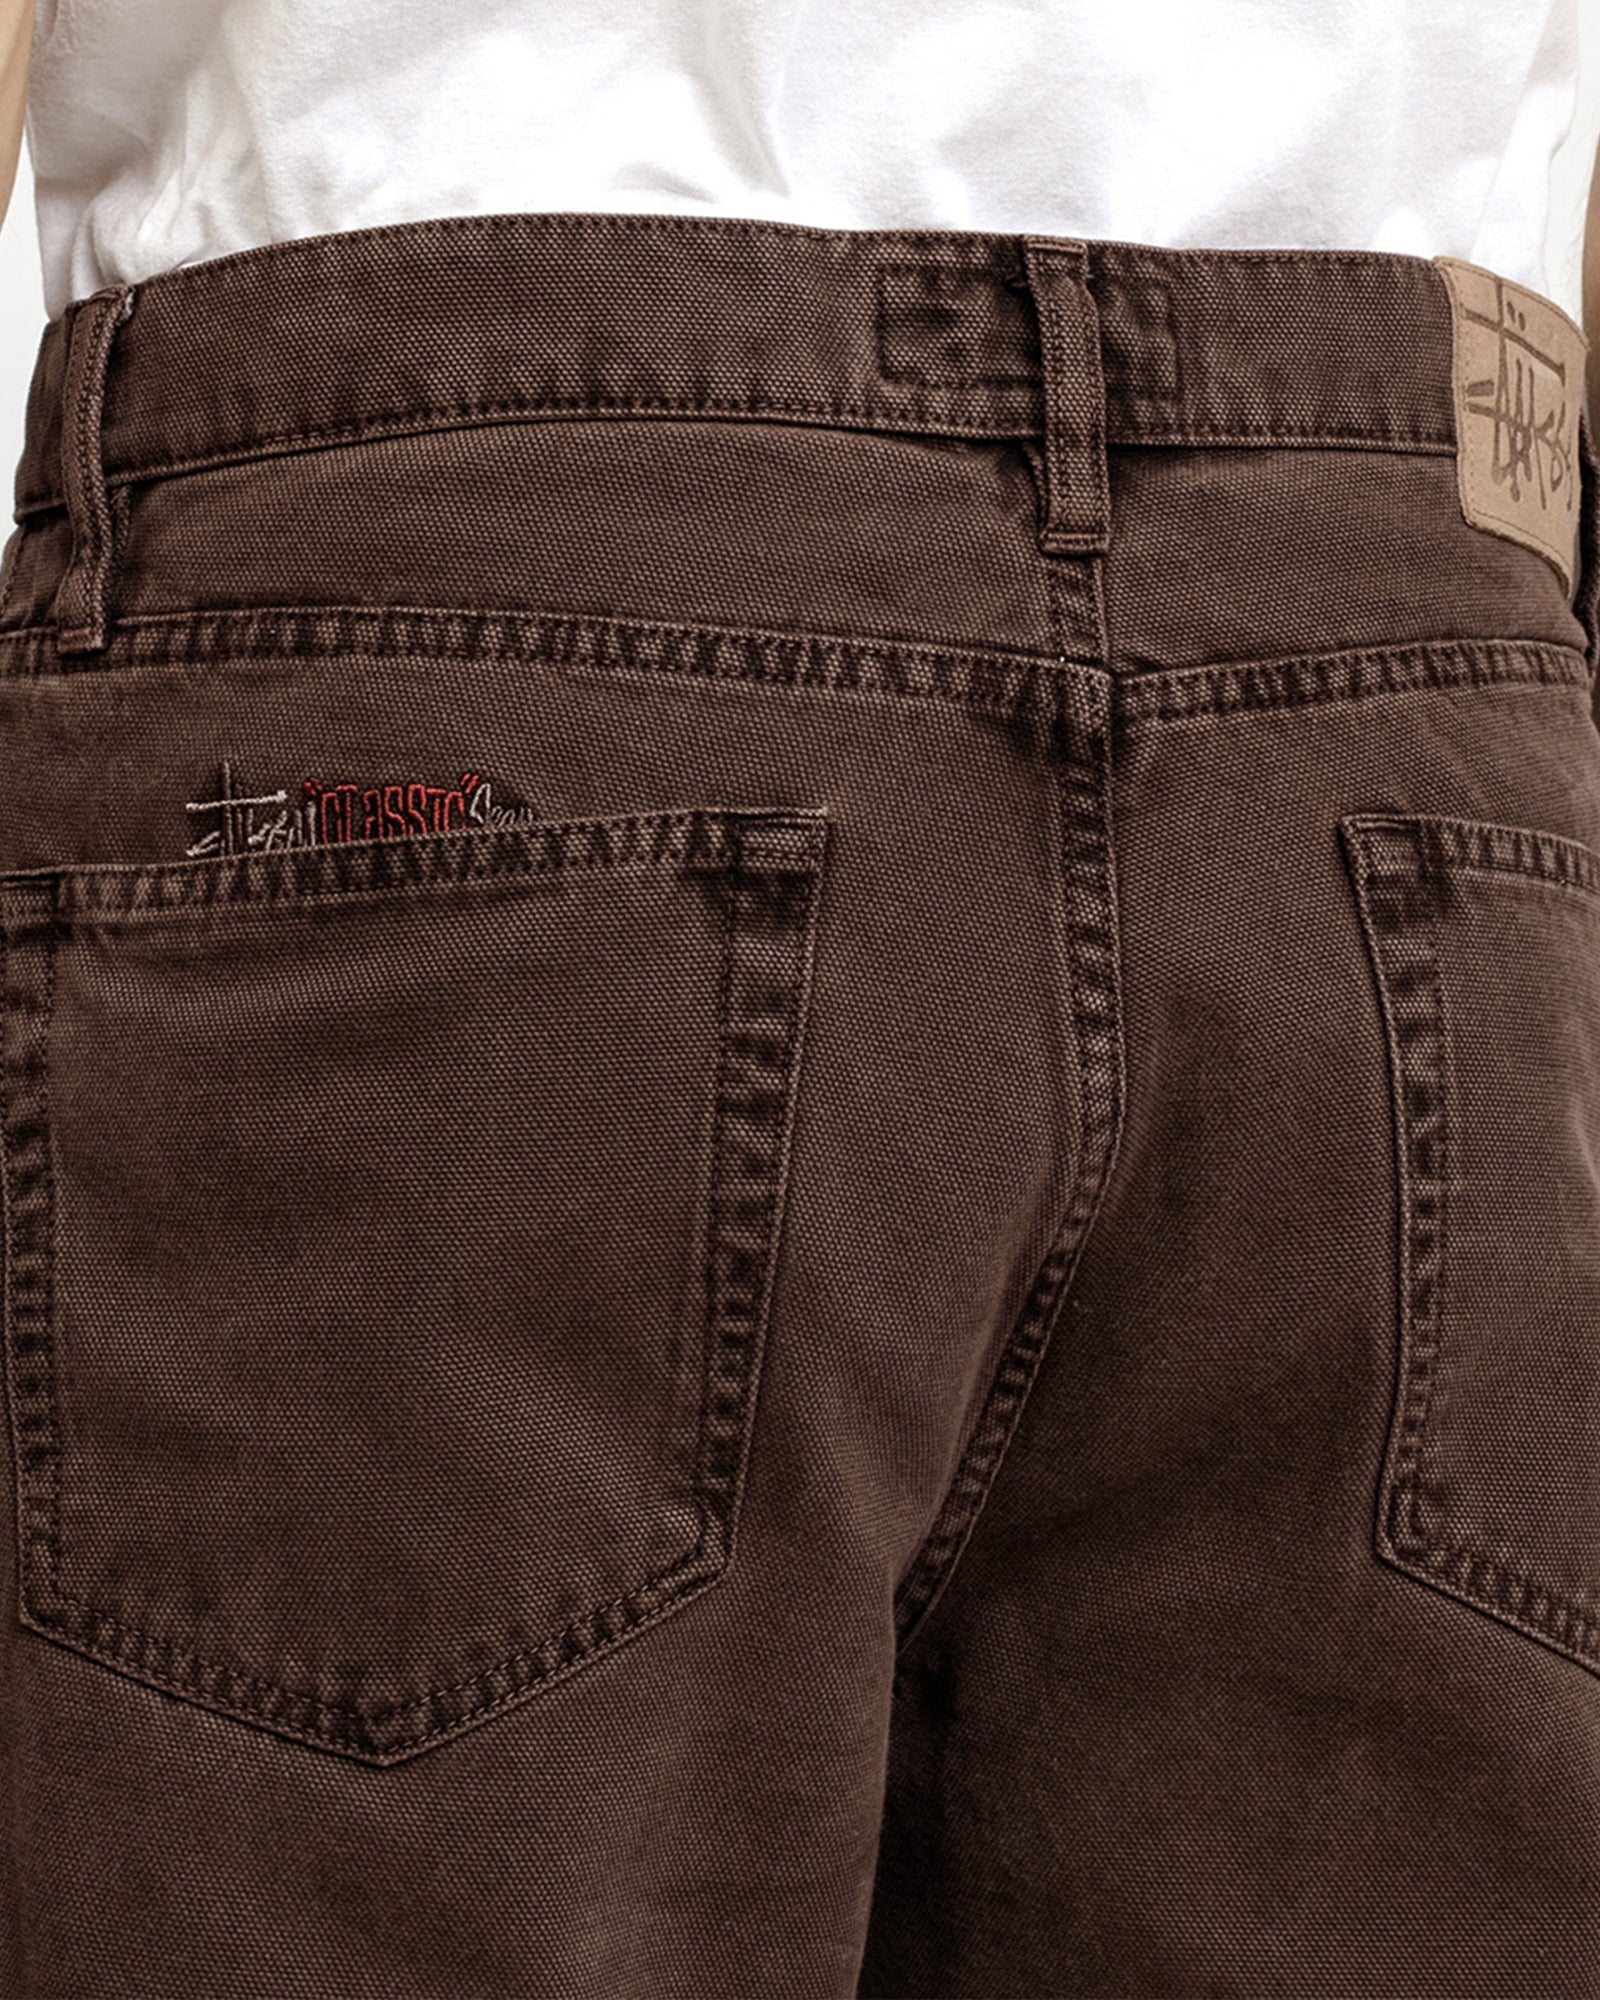 CLASSIC JEAN WASHED CANVAS BROWN BOTTOMS